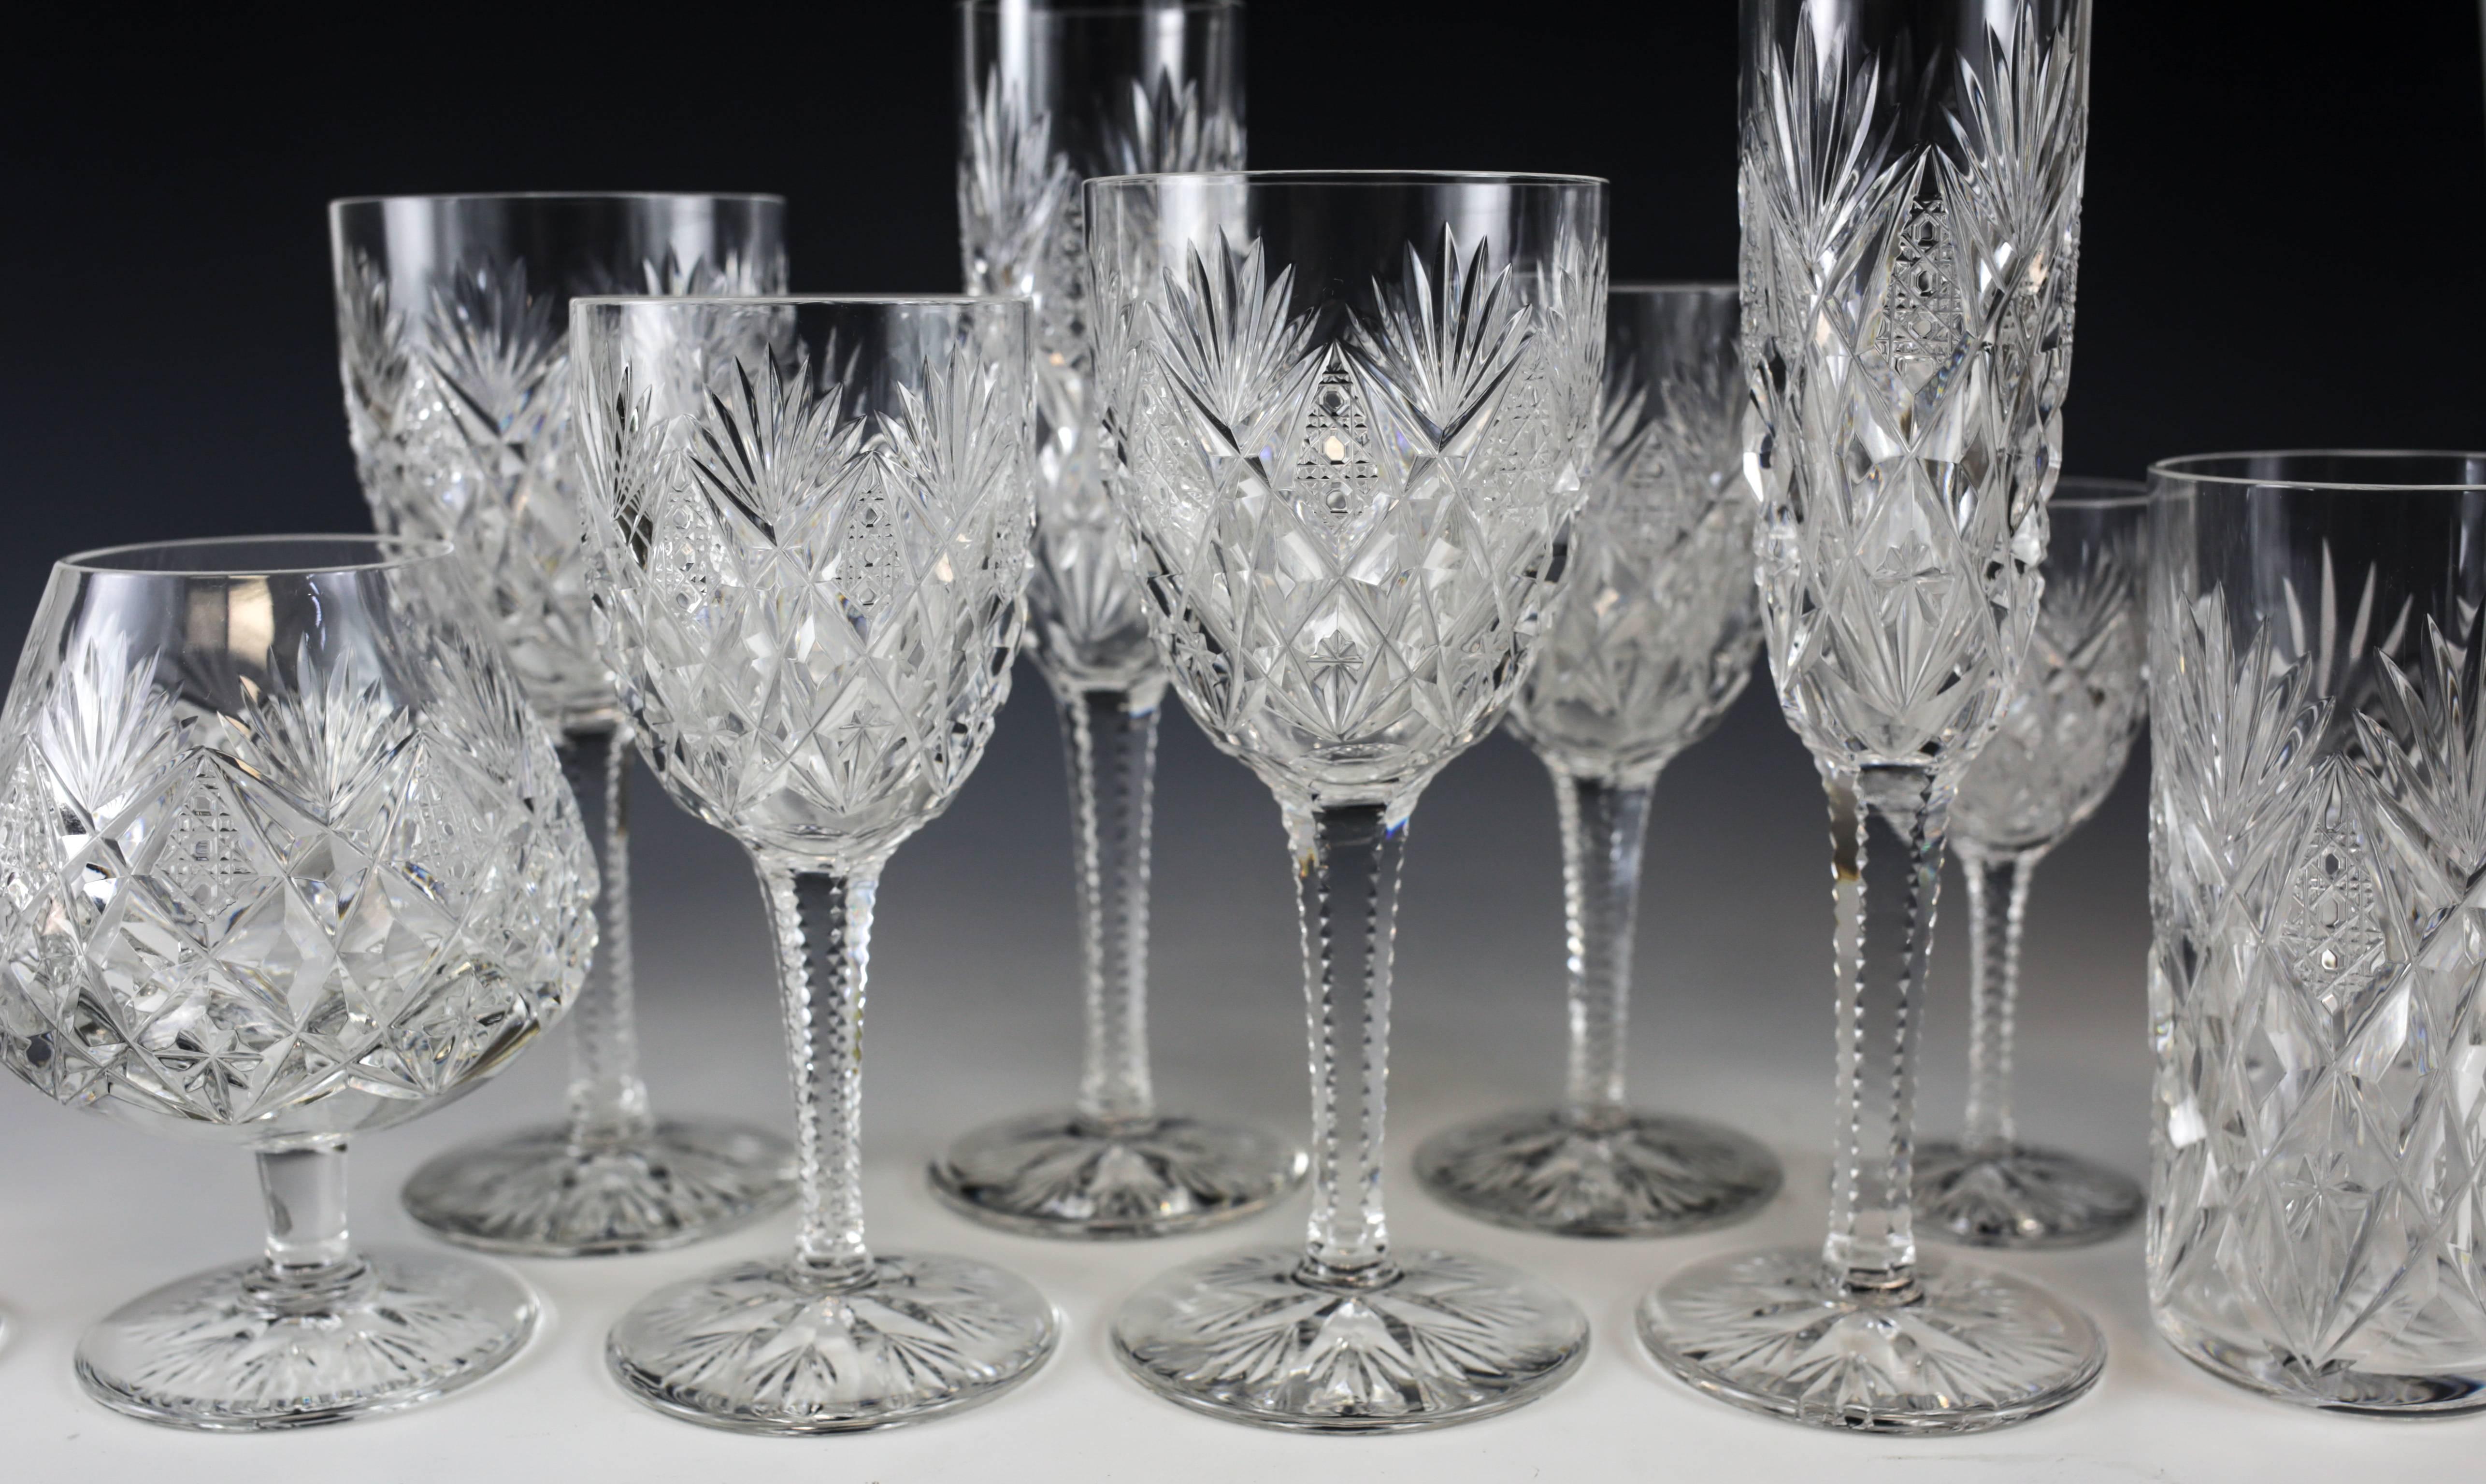 An exquisite stemware service for 12 by Saint Louis in the discontinued Florence pattern. Each piece is finely cut with an elegant fanned "pineapple" cut the stems and base are further cut for feel and aesthetics. 

The full service